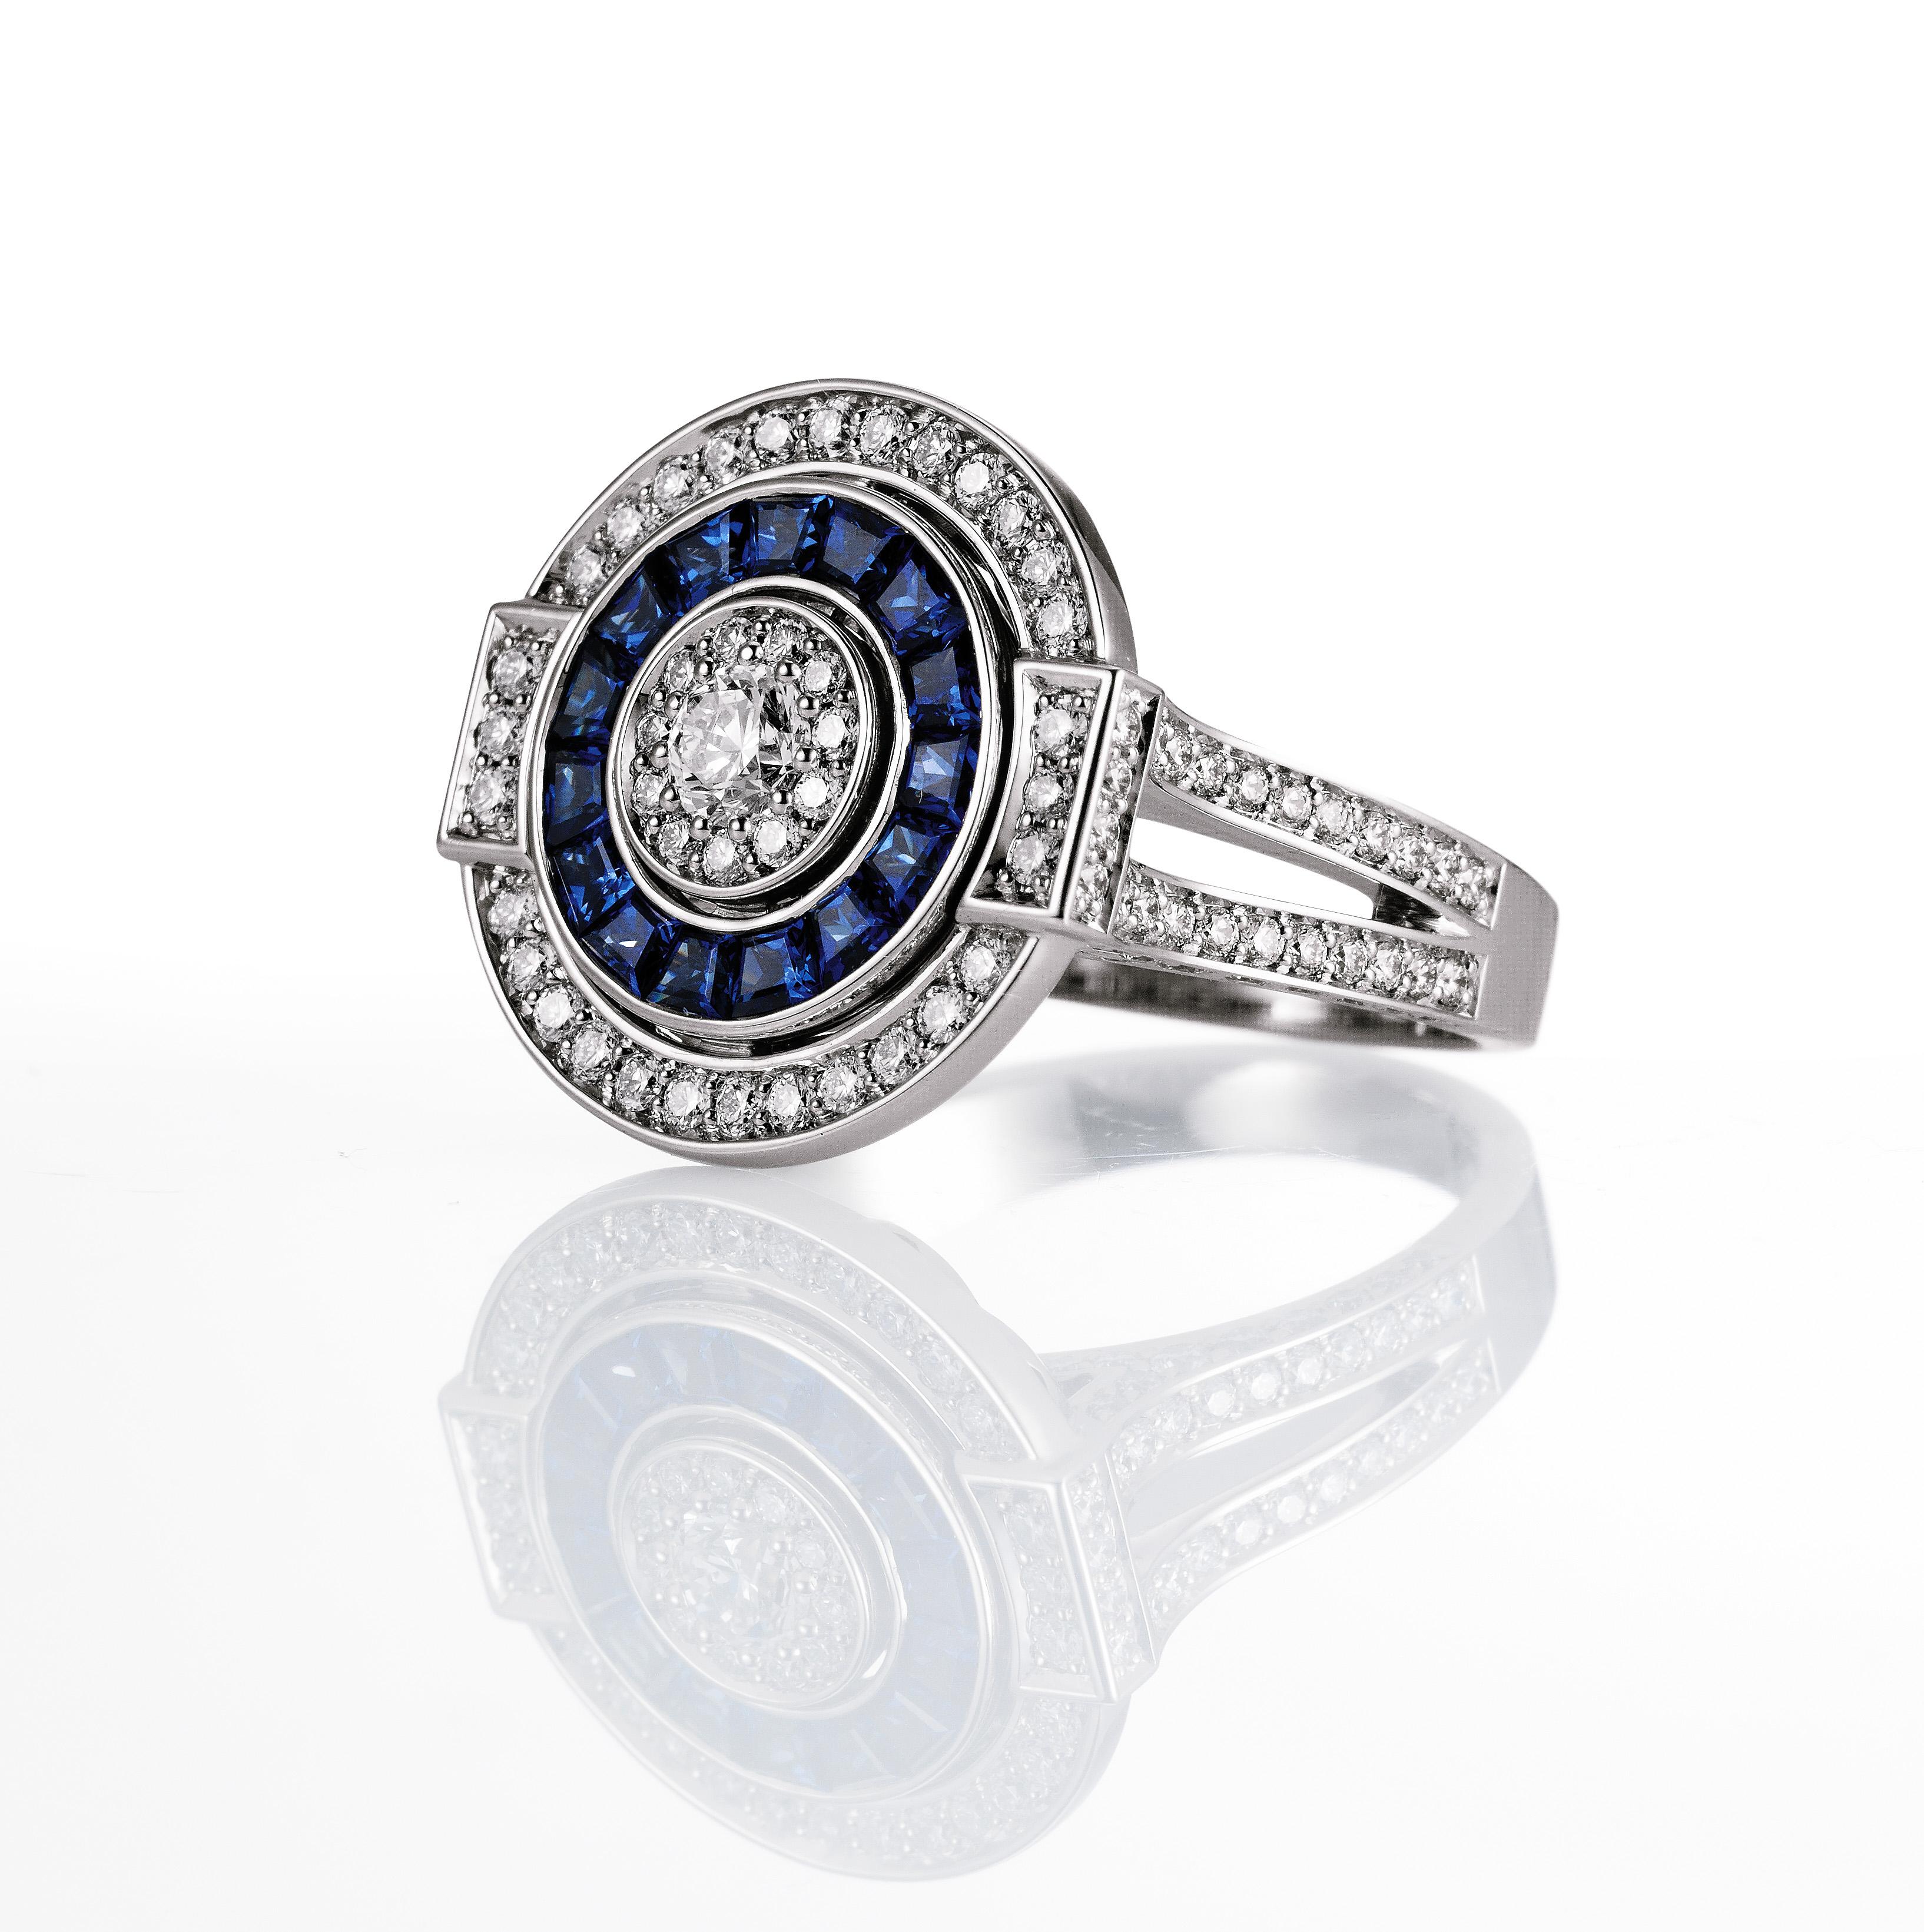 Contemporary Victor Mayer Soiree Ring 18k White Gold Diamonds 1.13 ct Sapphire 0.97 ct For Sale